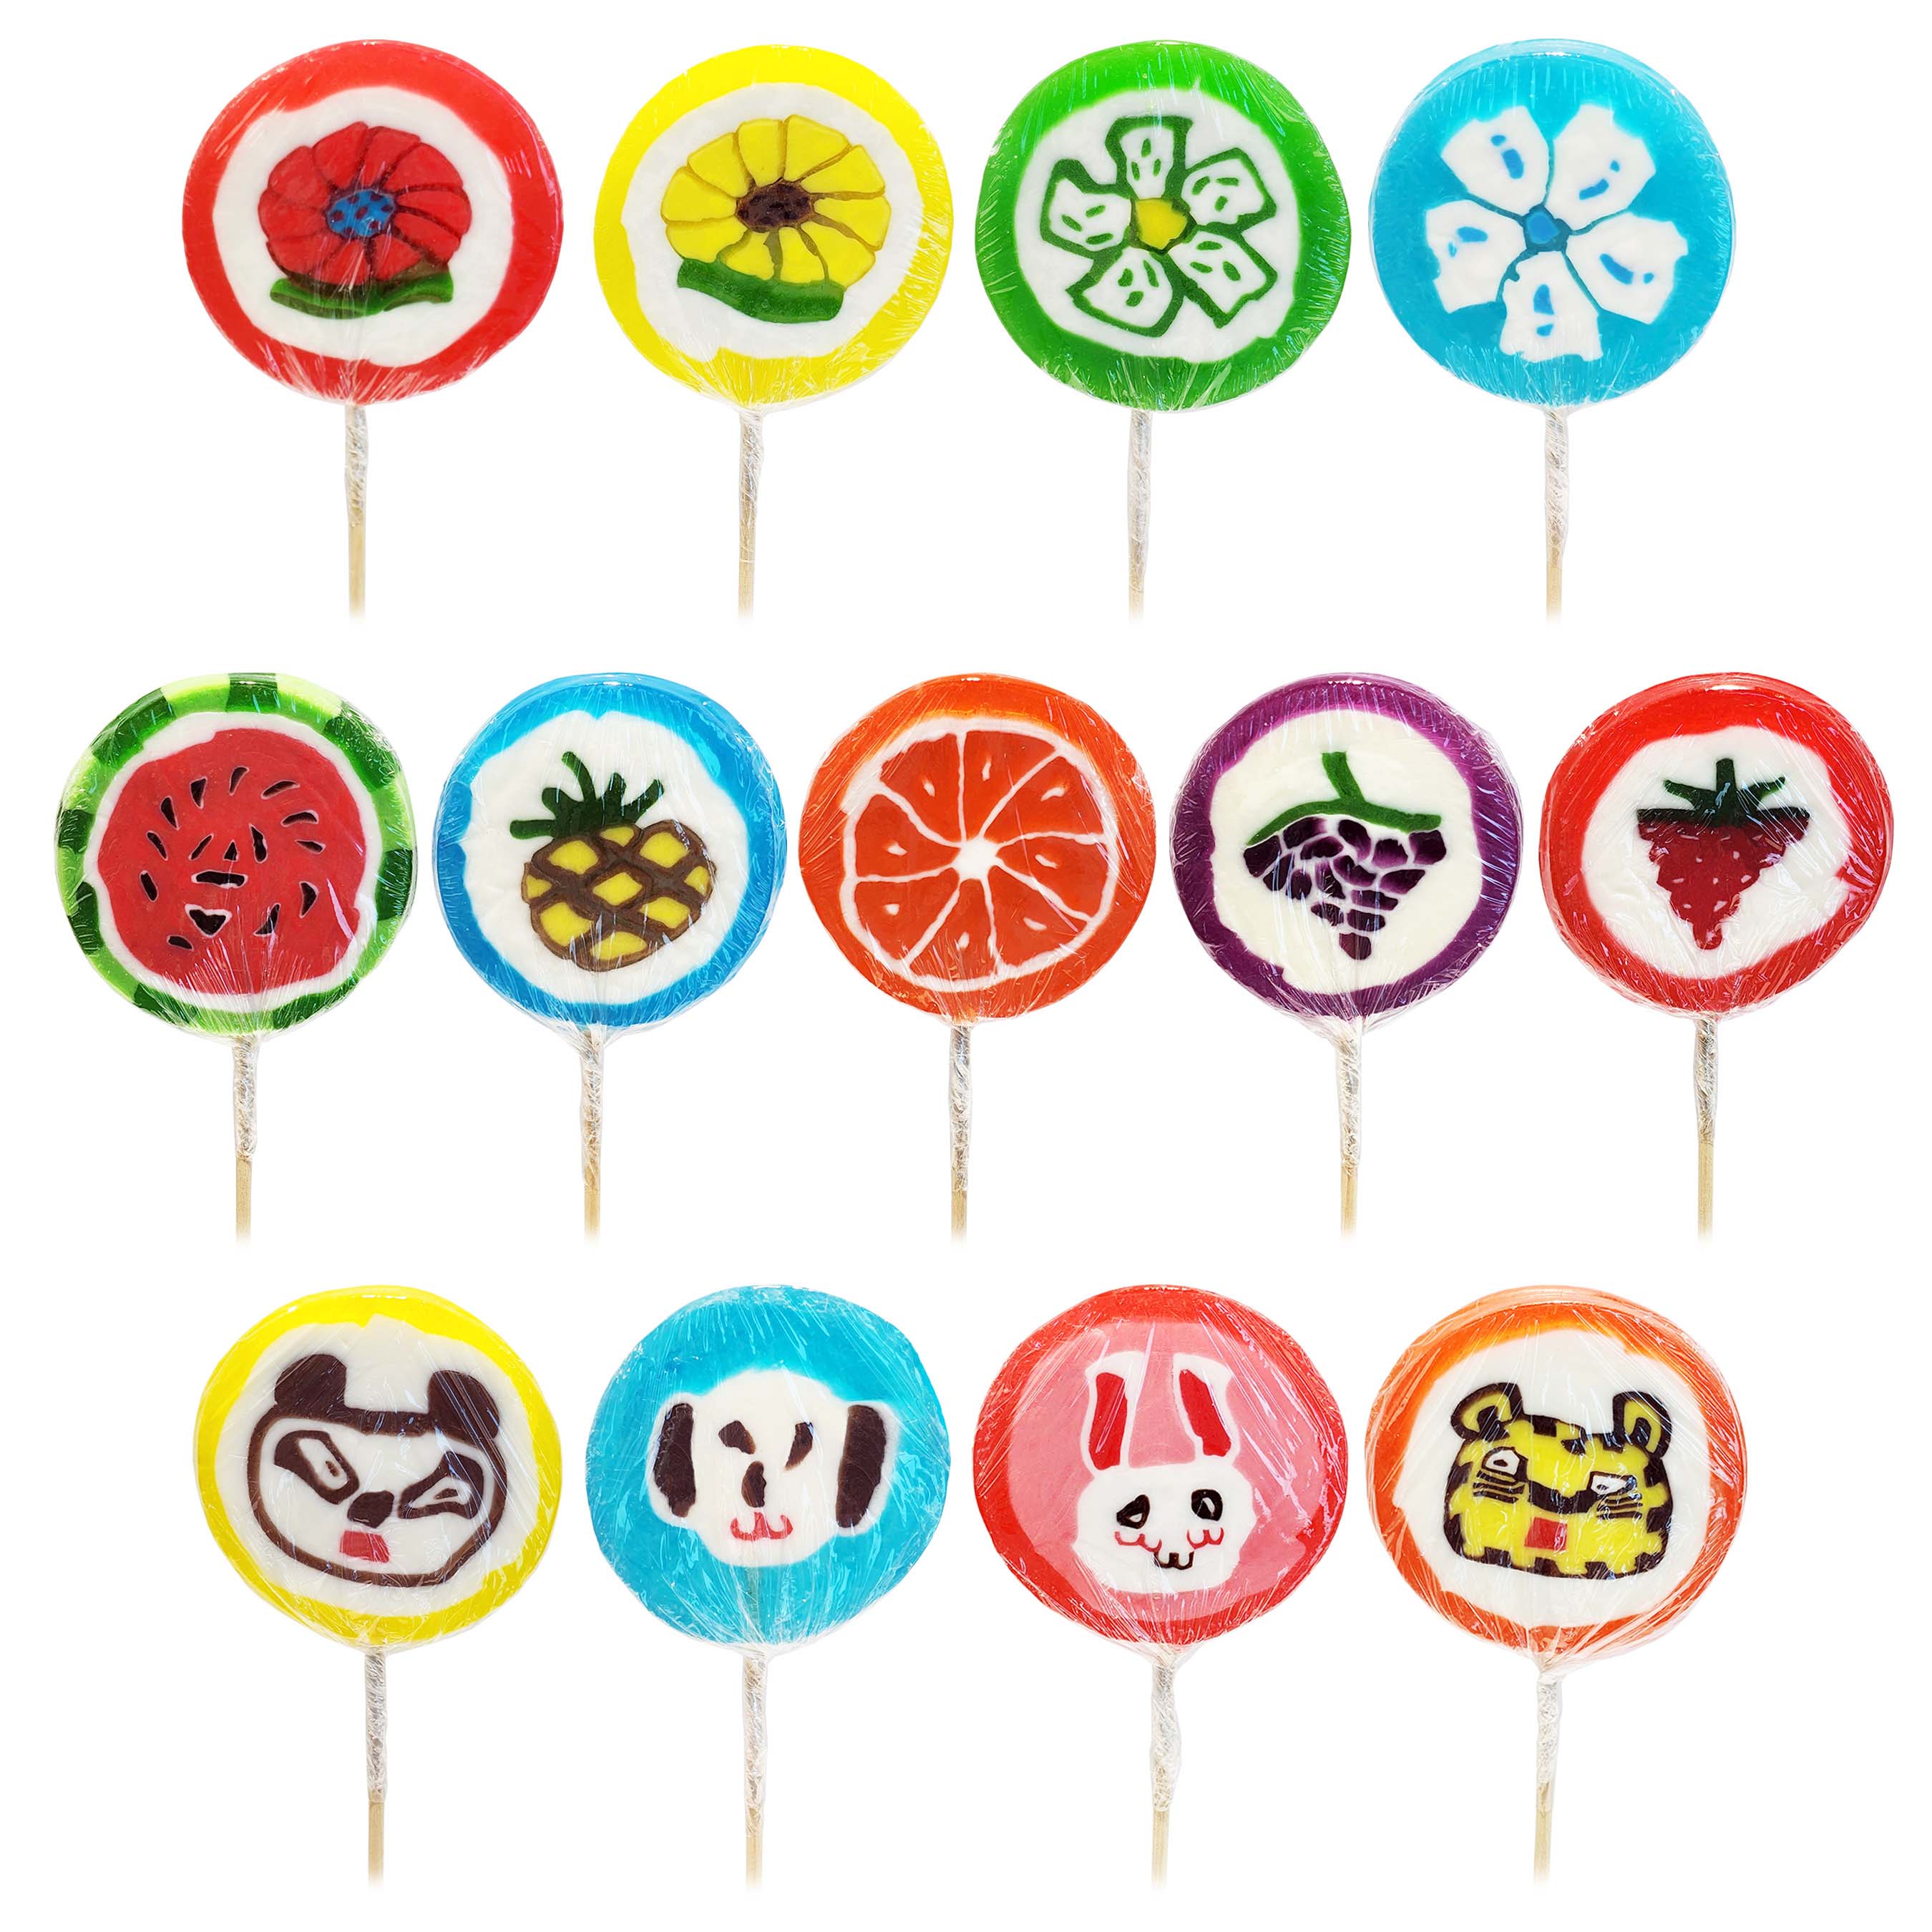 Jumbo 90 gram lollipops, available styles are in Animals, Fruits, and Flowers